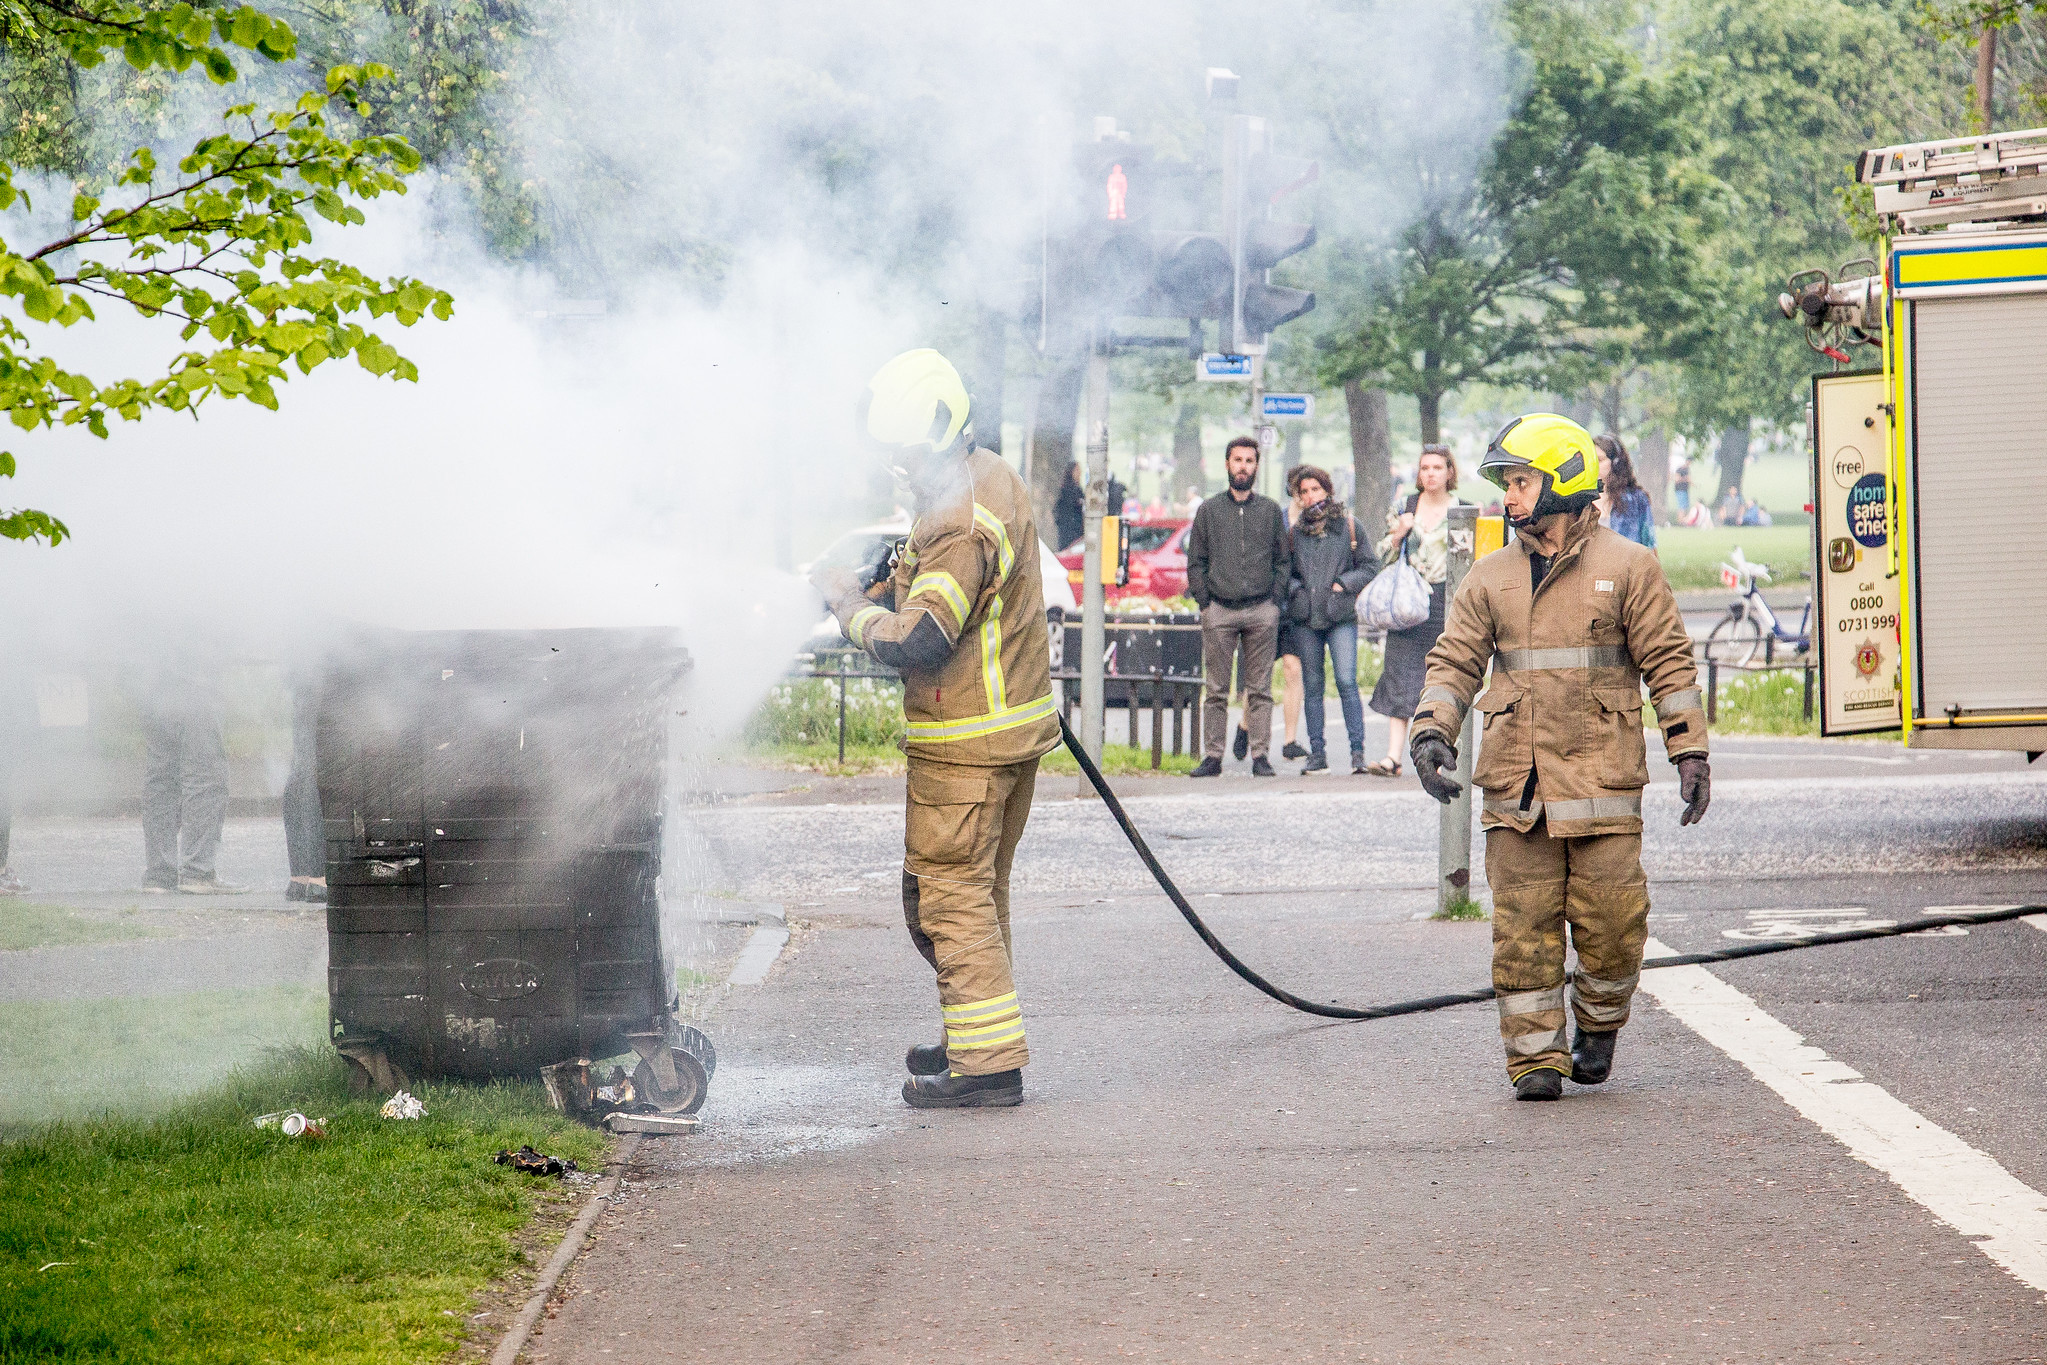 Two firefighters extinguish a small blaze on the streets of Edinburgh